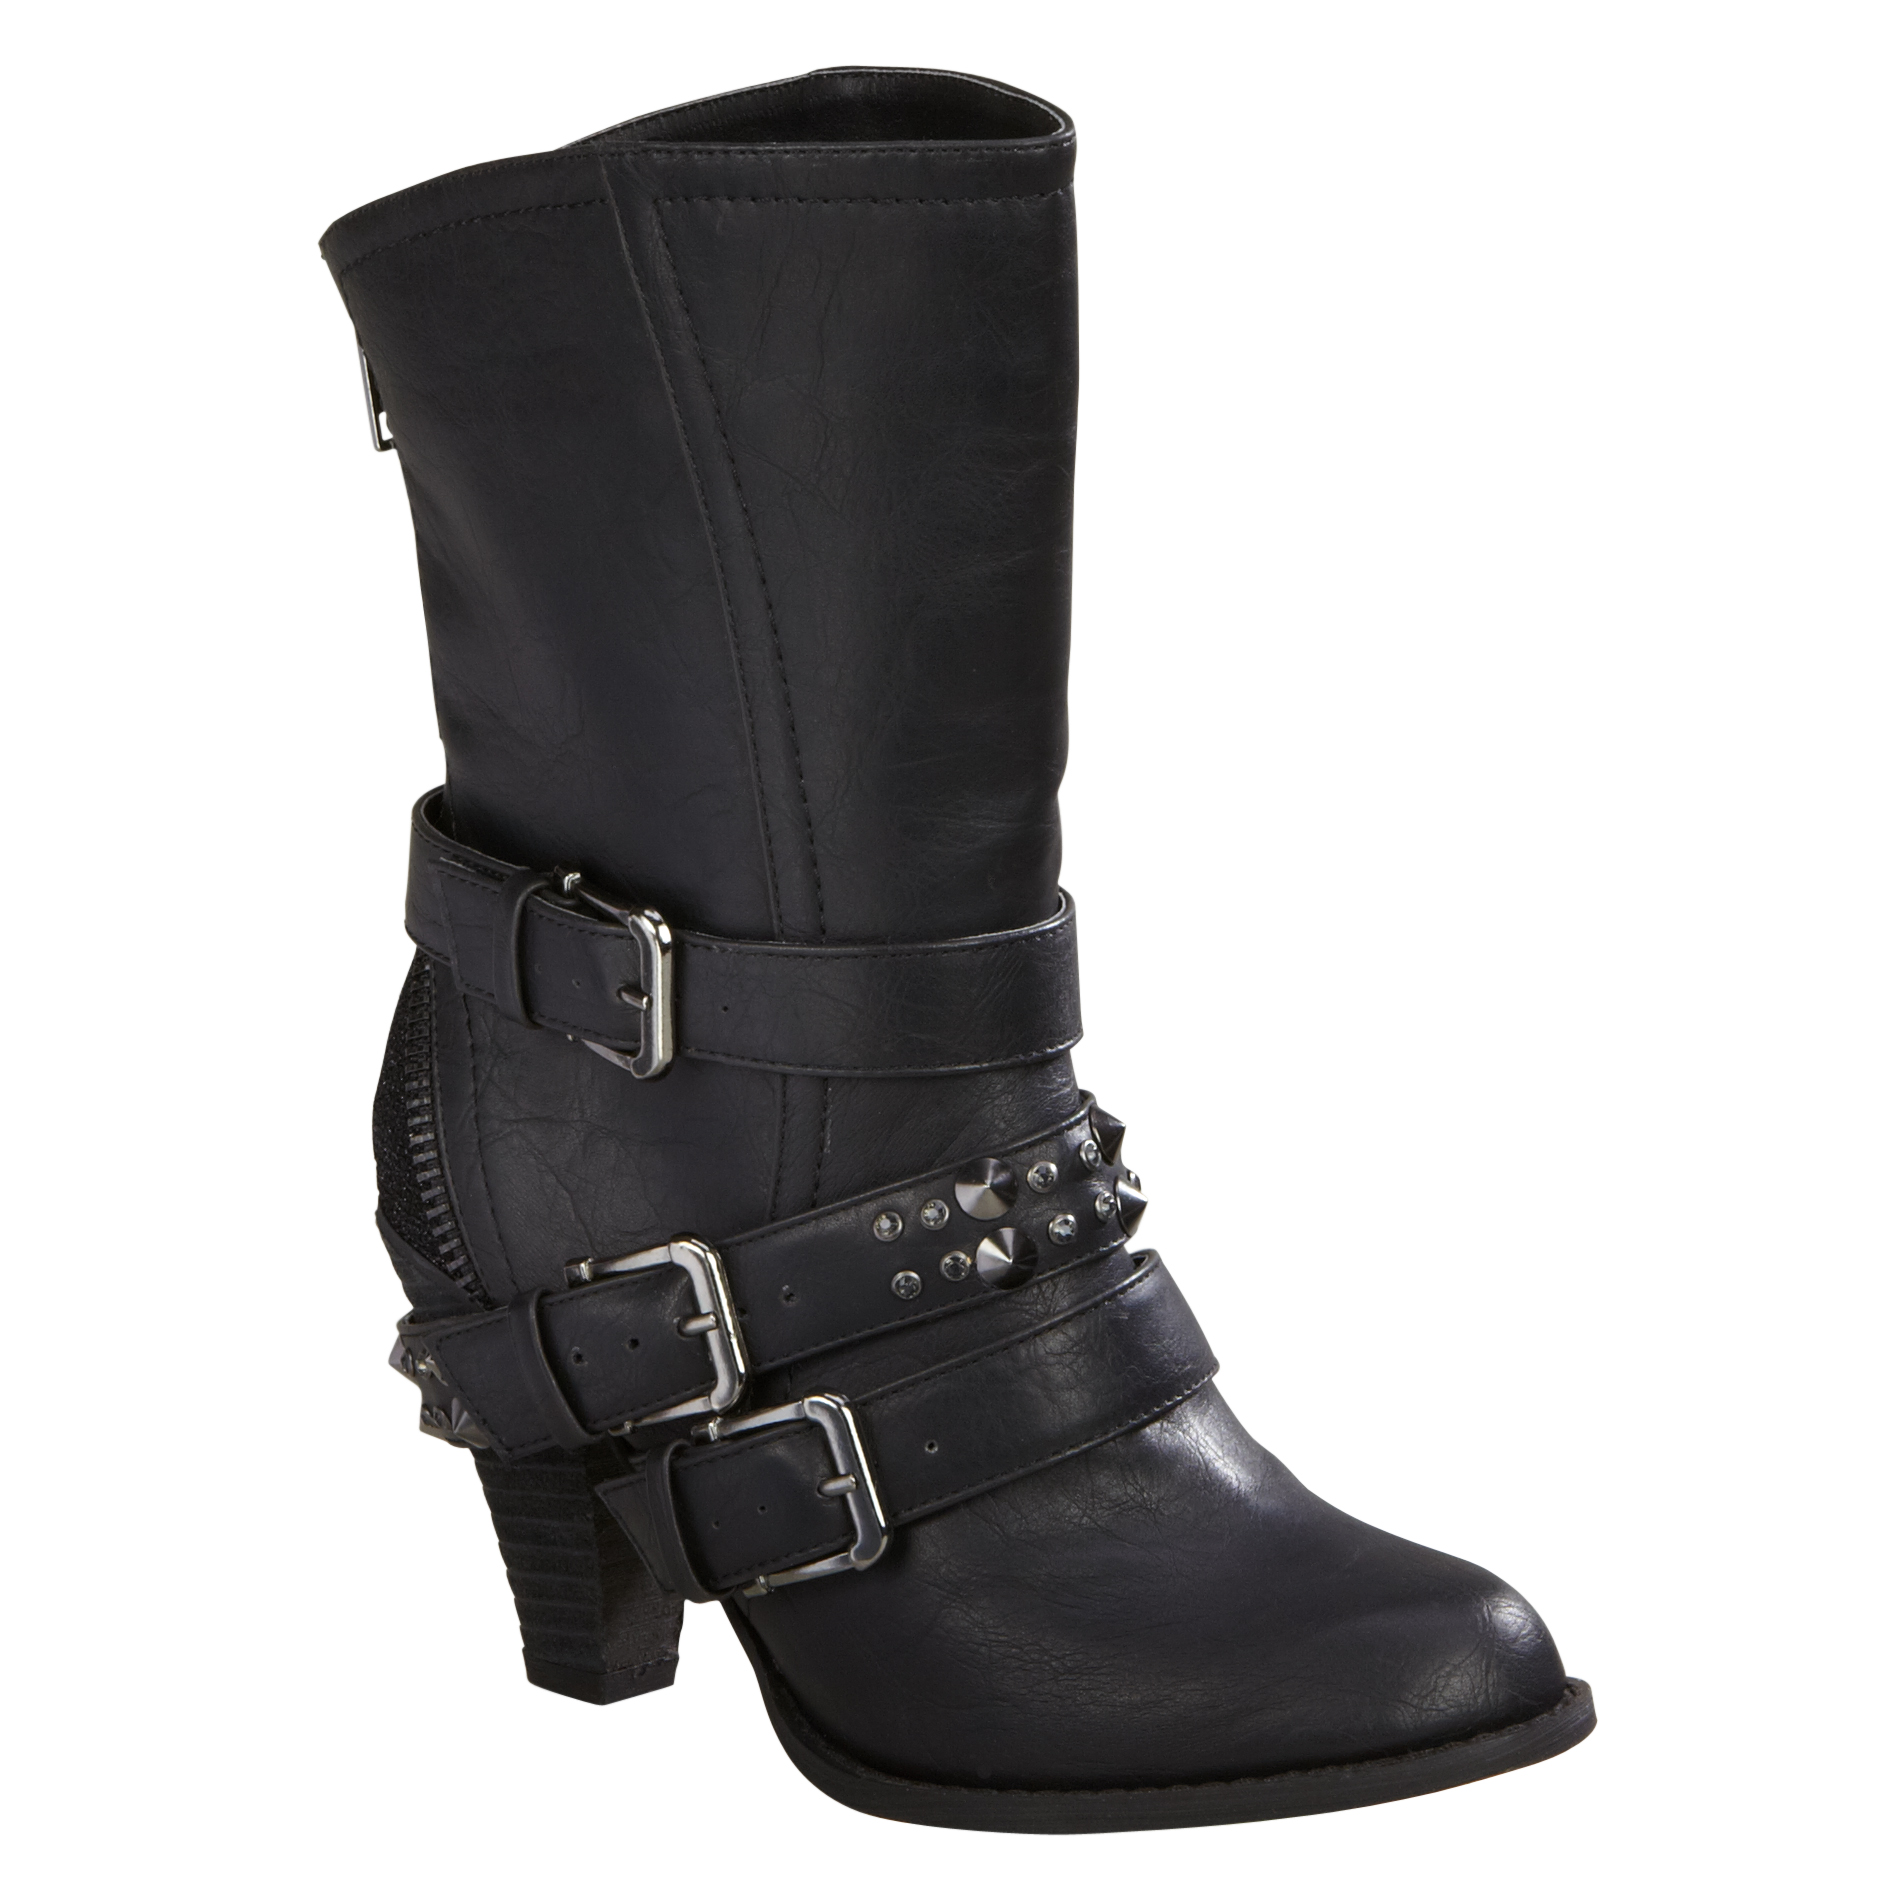 Not Rated Women's Fashion Boot Spiffy - Black